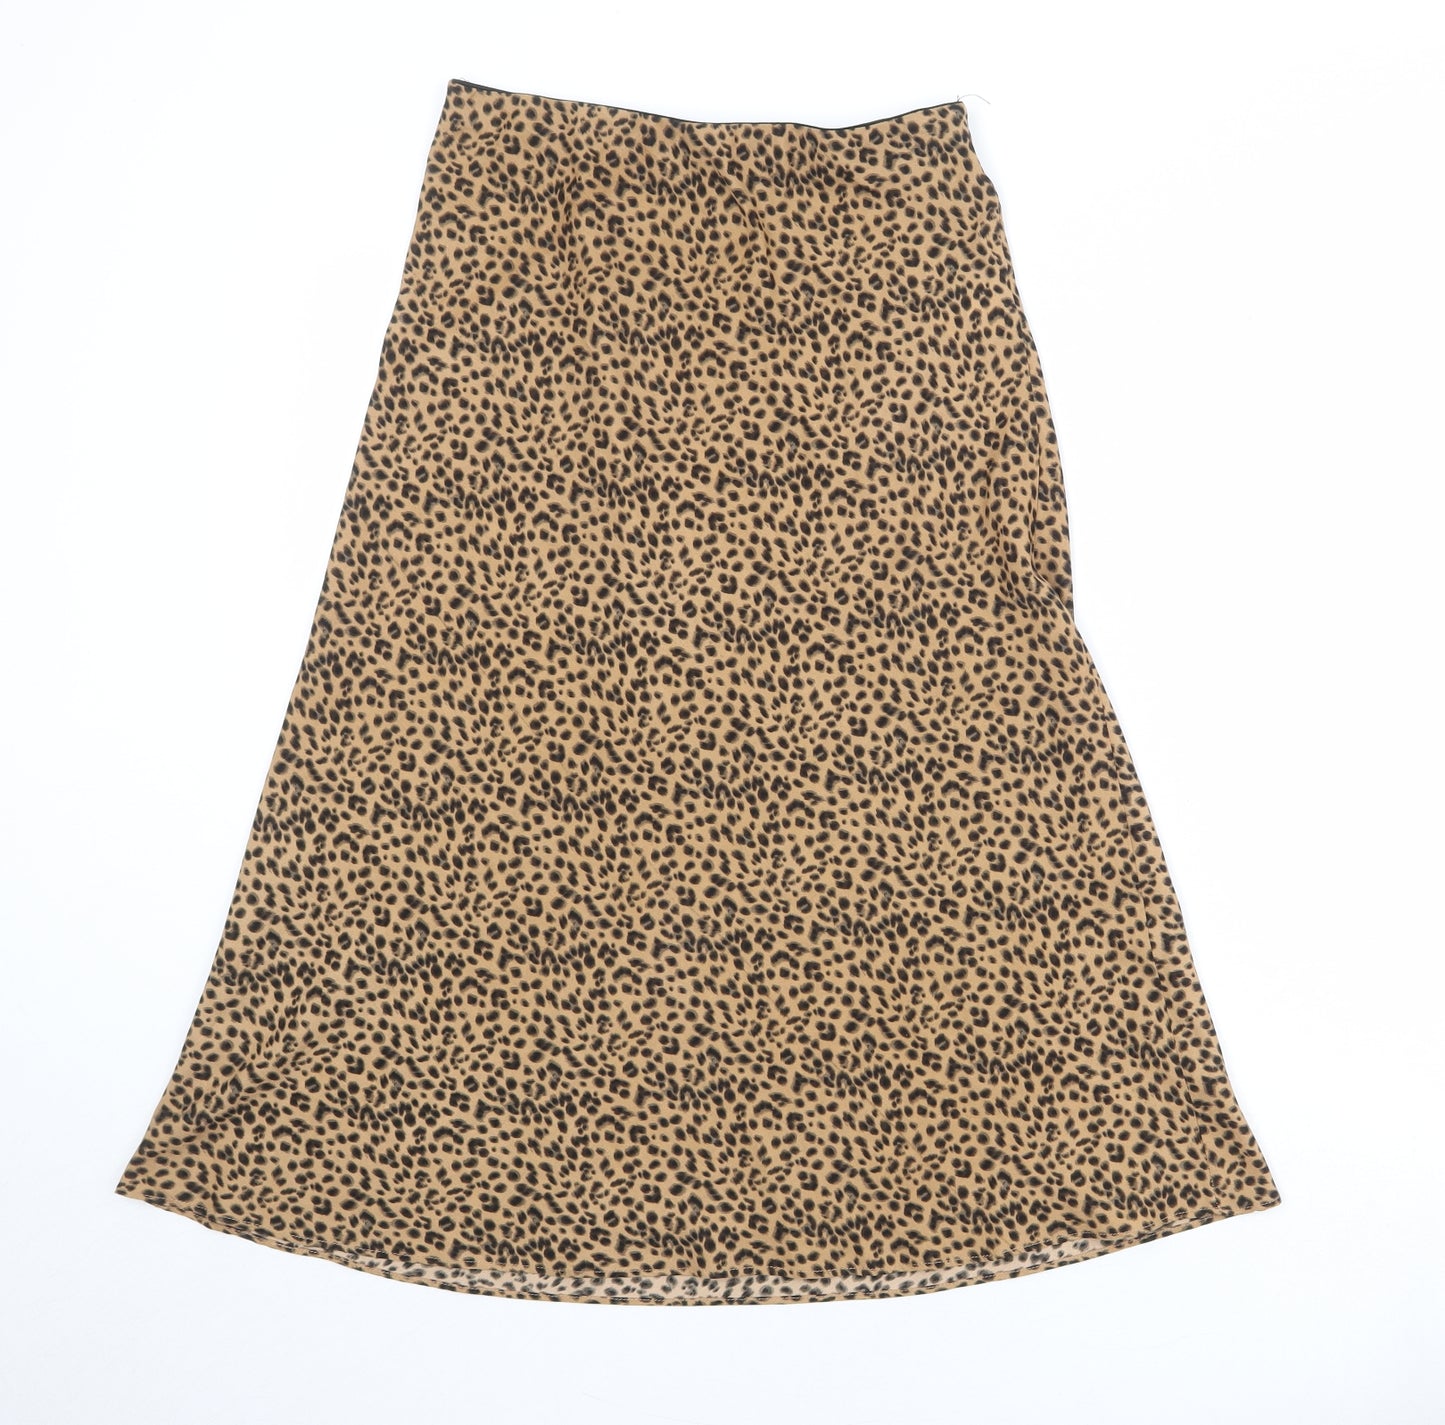 Nasty Gal Womens Brown Animal Print Polyester Swing Skirt Size 12 - Leopard Pattern